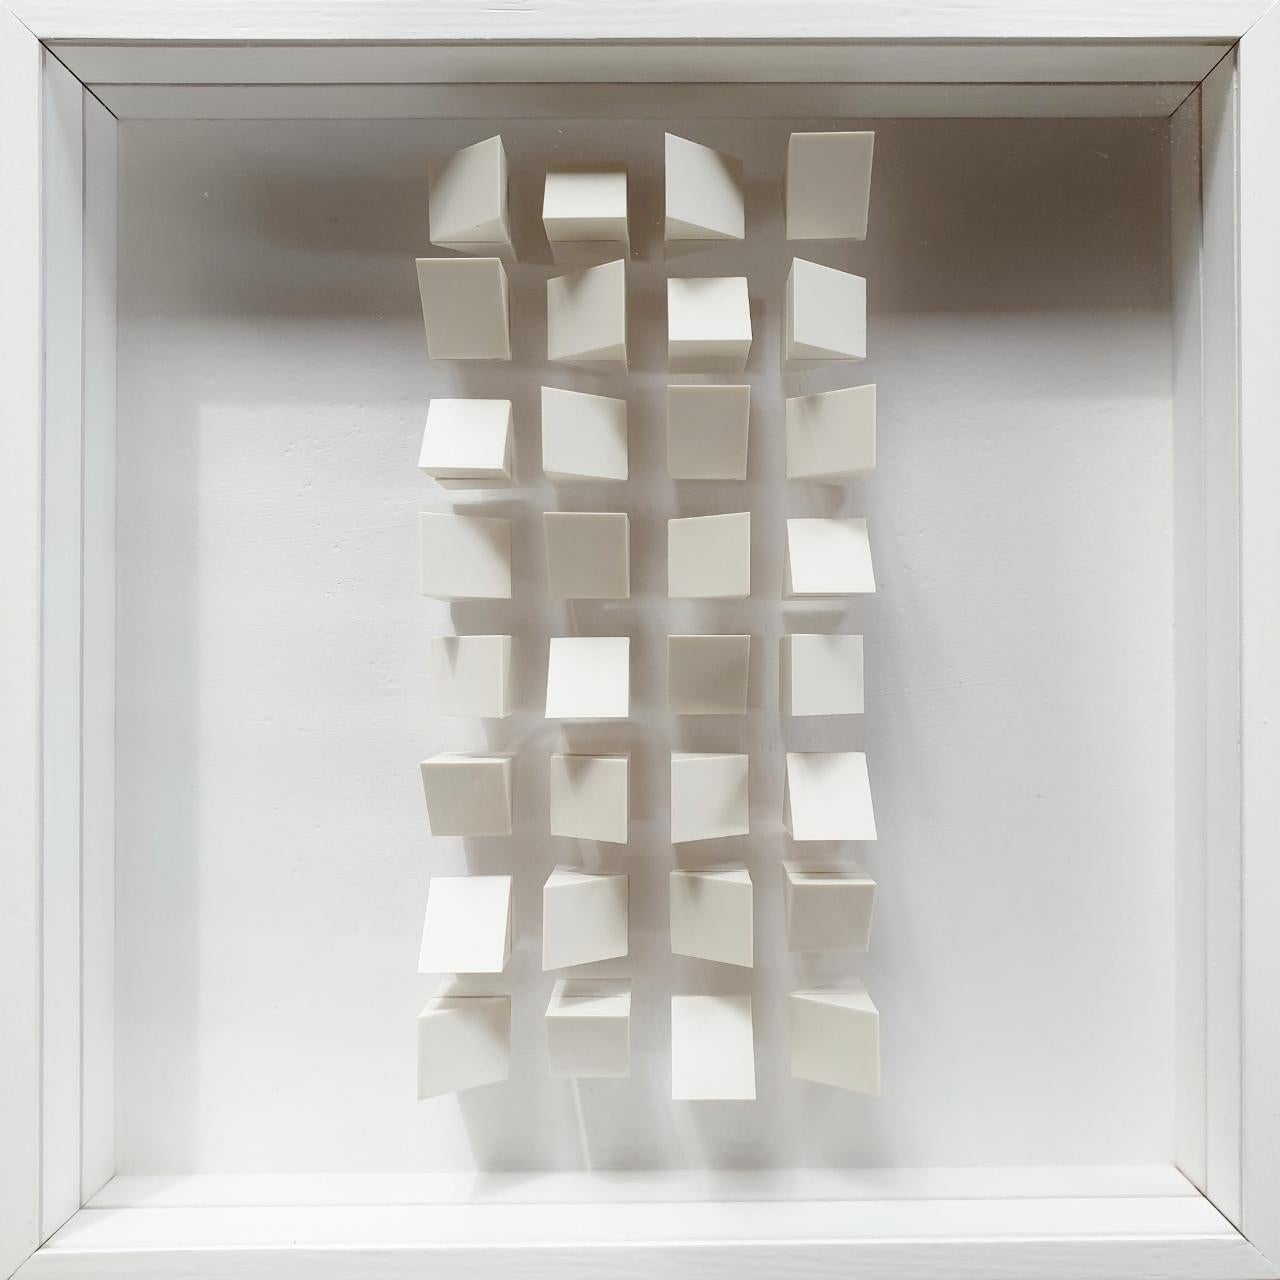 Collectors Item! Pfahl 1a is a contemporary modern painting relief by renowned German artist Klaus Staudt. The relief is made from meticulously cut polystyrol elements that are mounted on both sides of a plexiglass divider inside a box frame. The